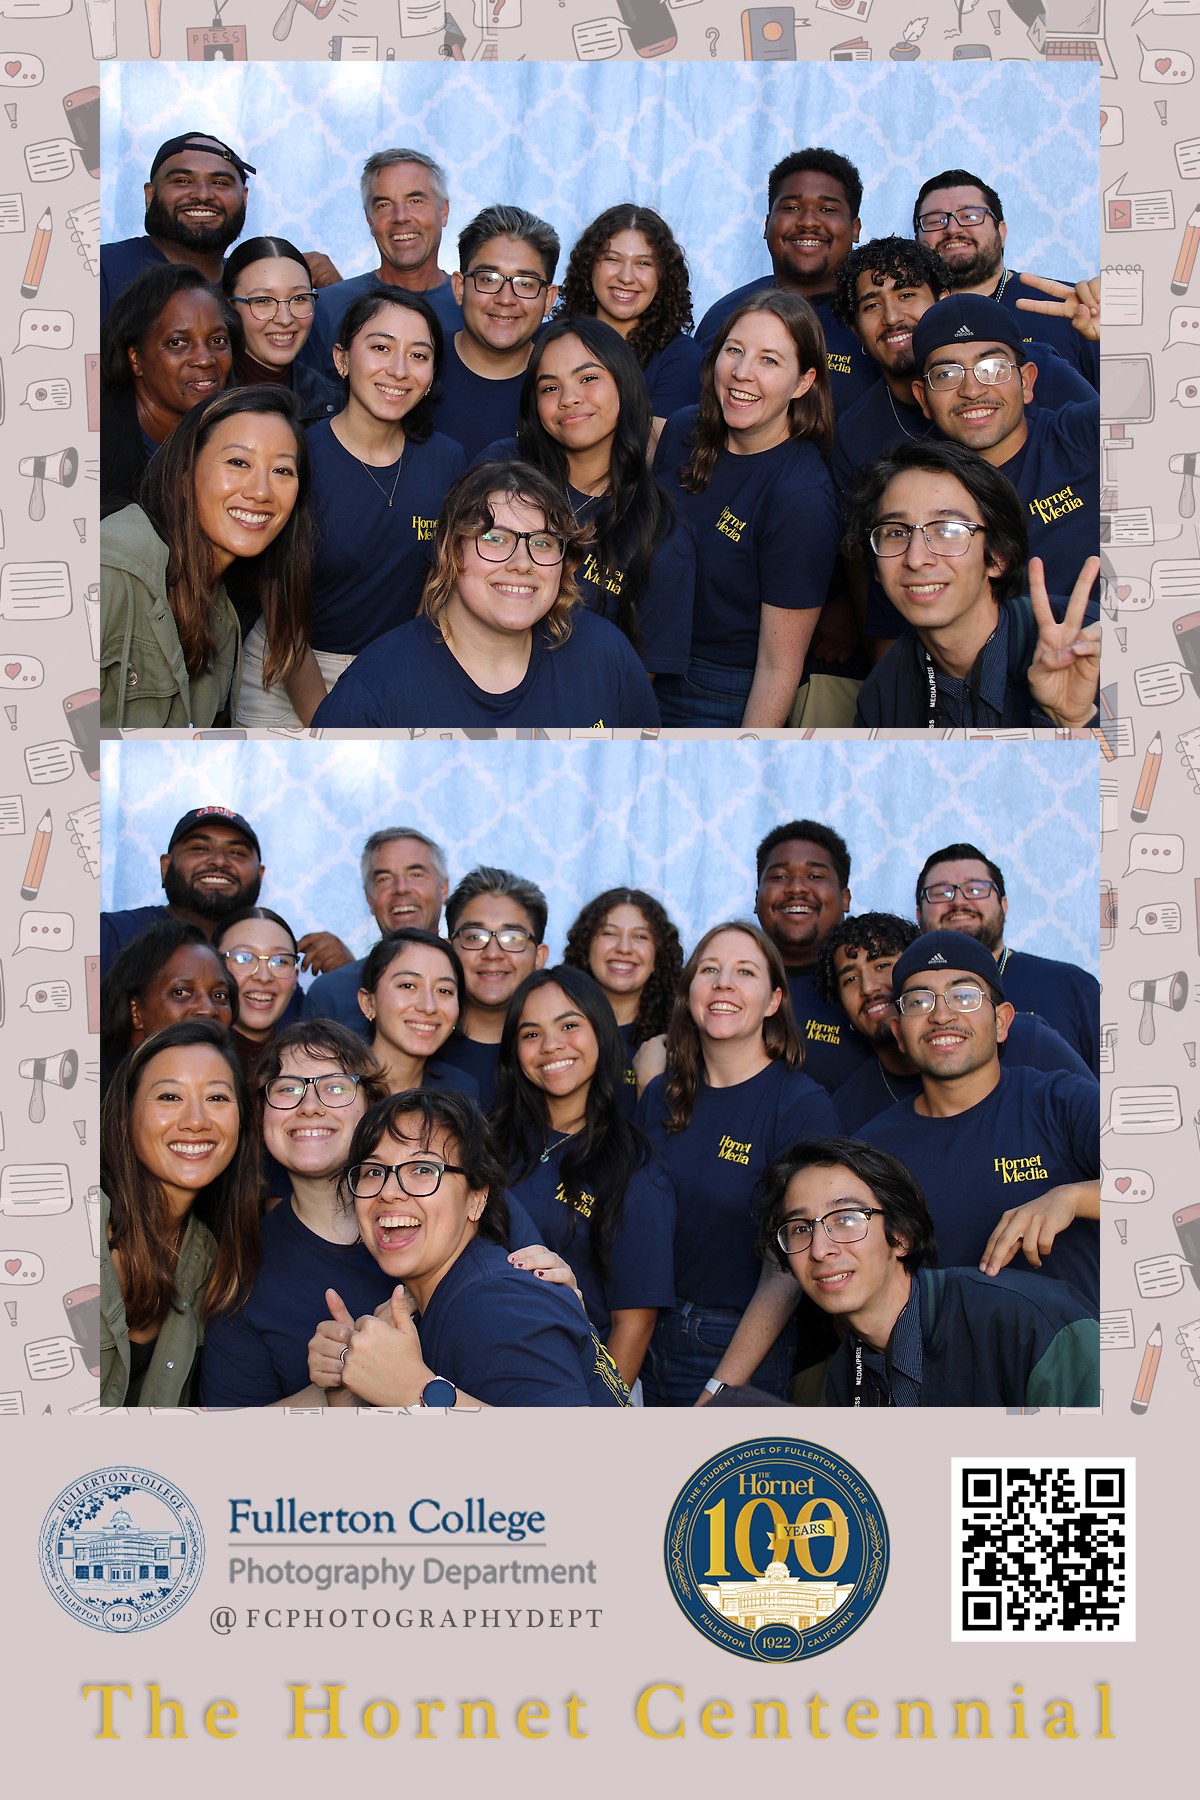 Hornet staffers pose at the photography departments photo booth at The Hornets centennial celebration in the Fullerton College quad on Oct. 11, 2023.